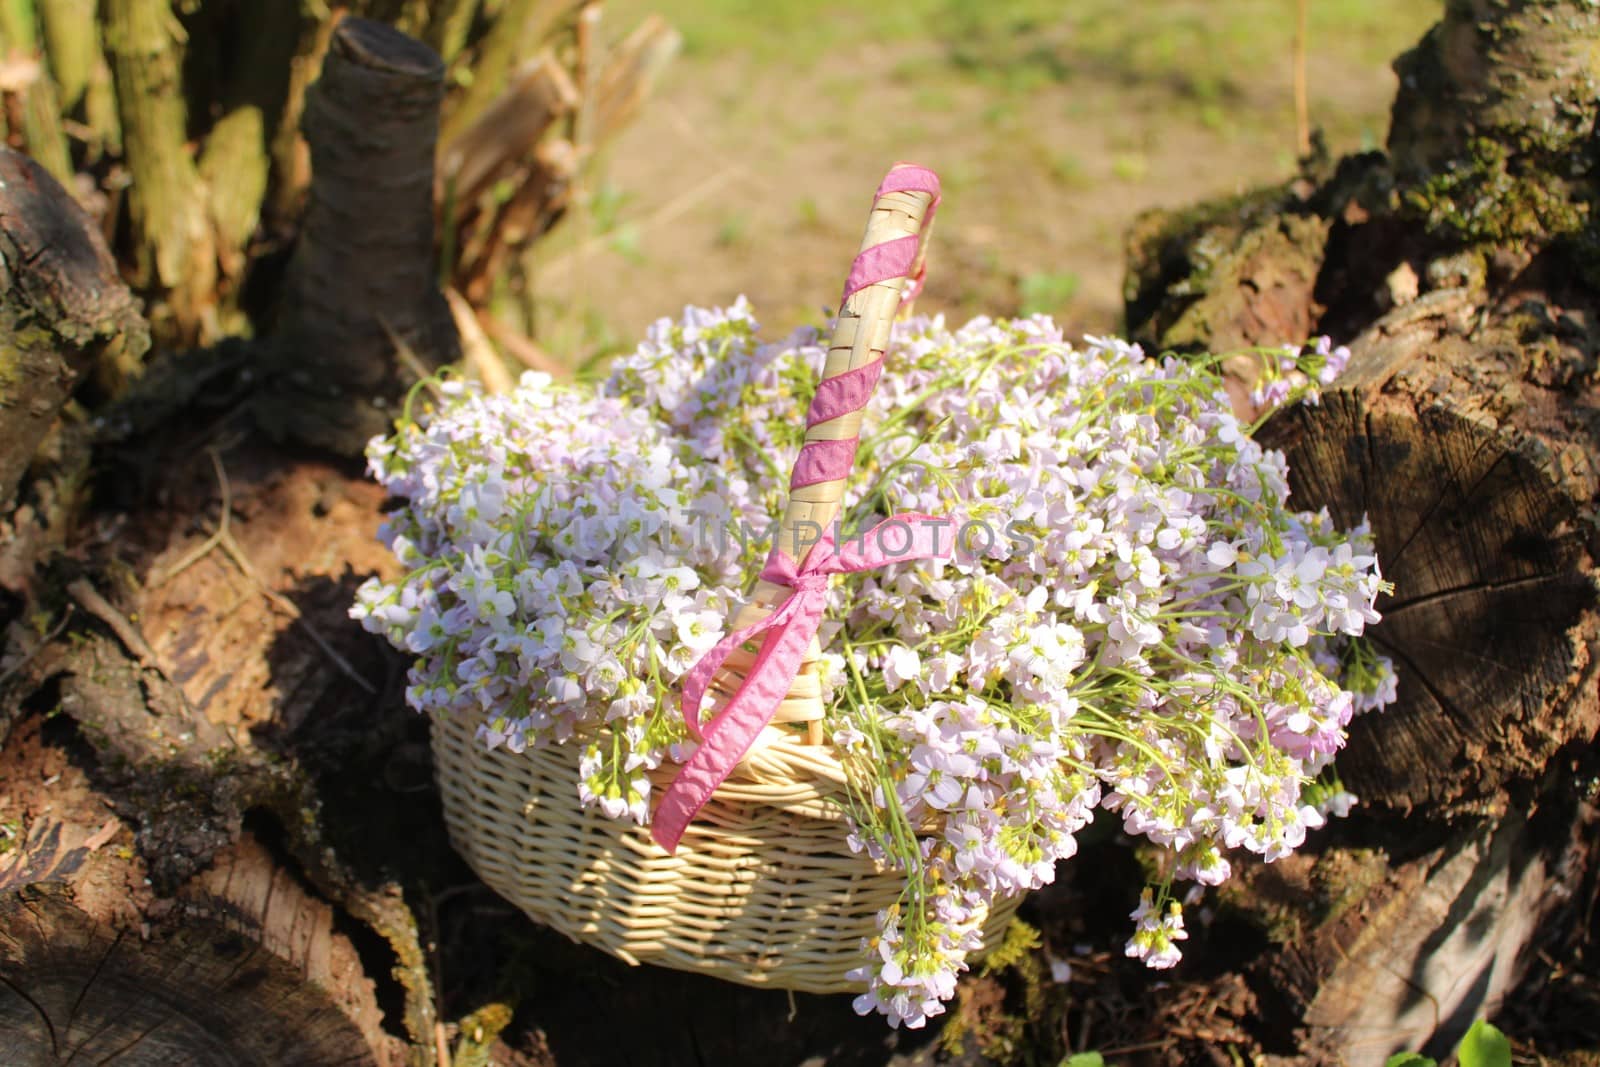 cuckoo flowers in a basket on a tree trunk by martina_unbehauen